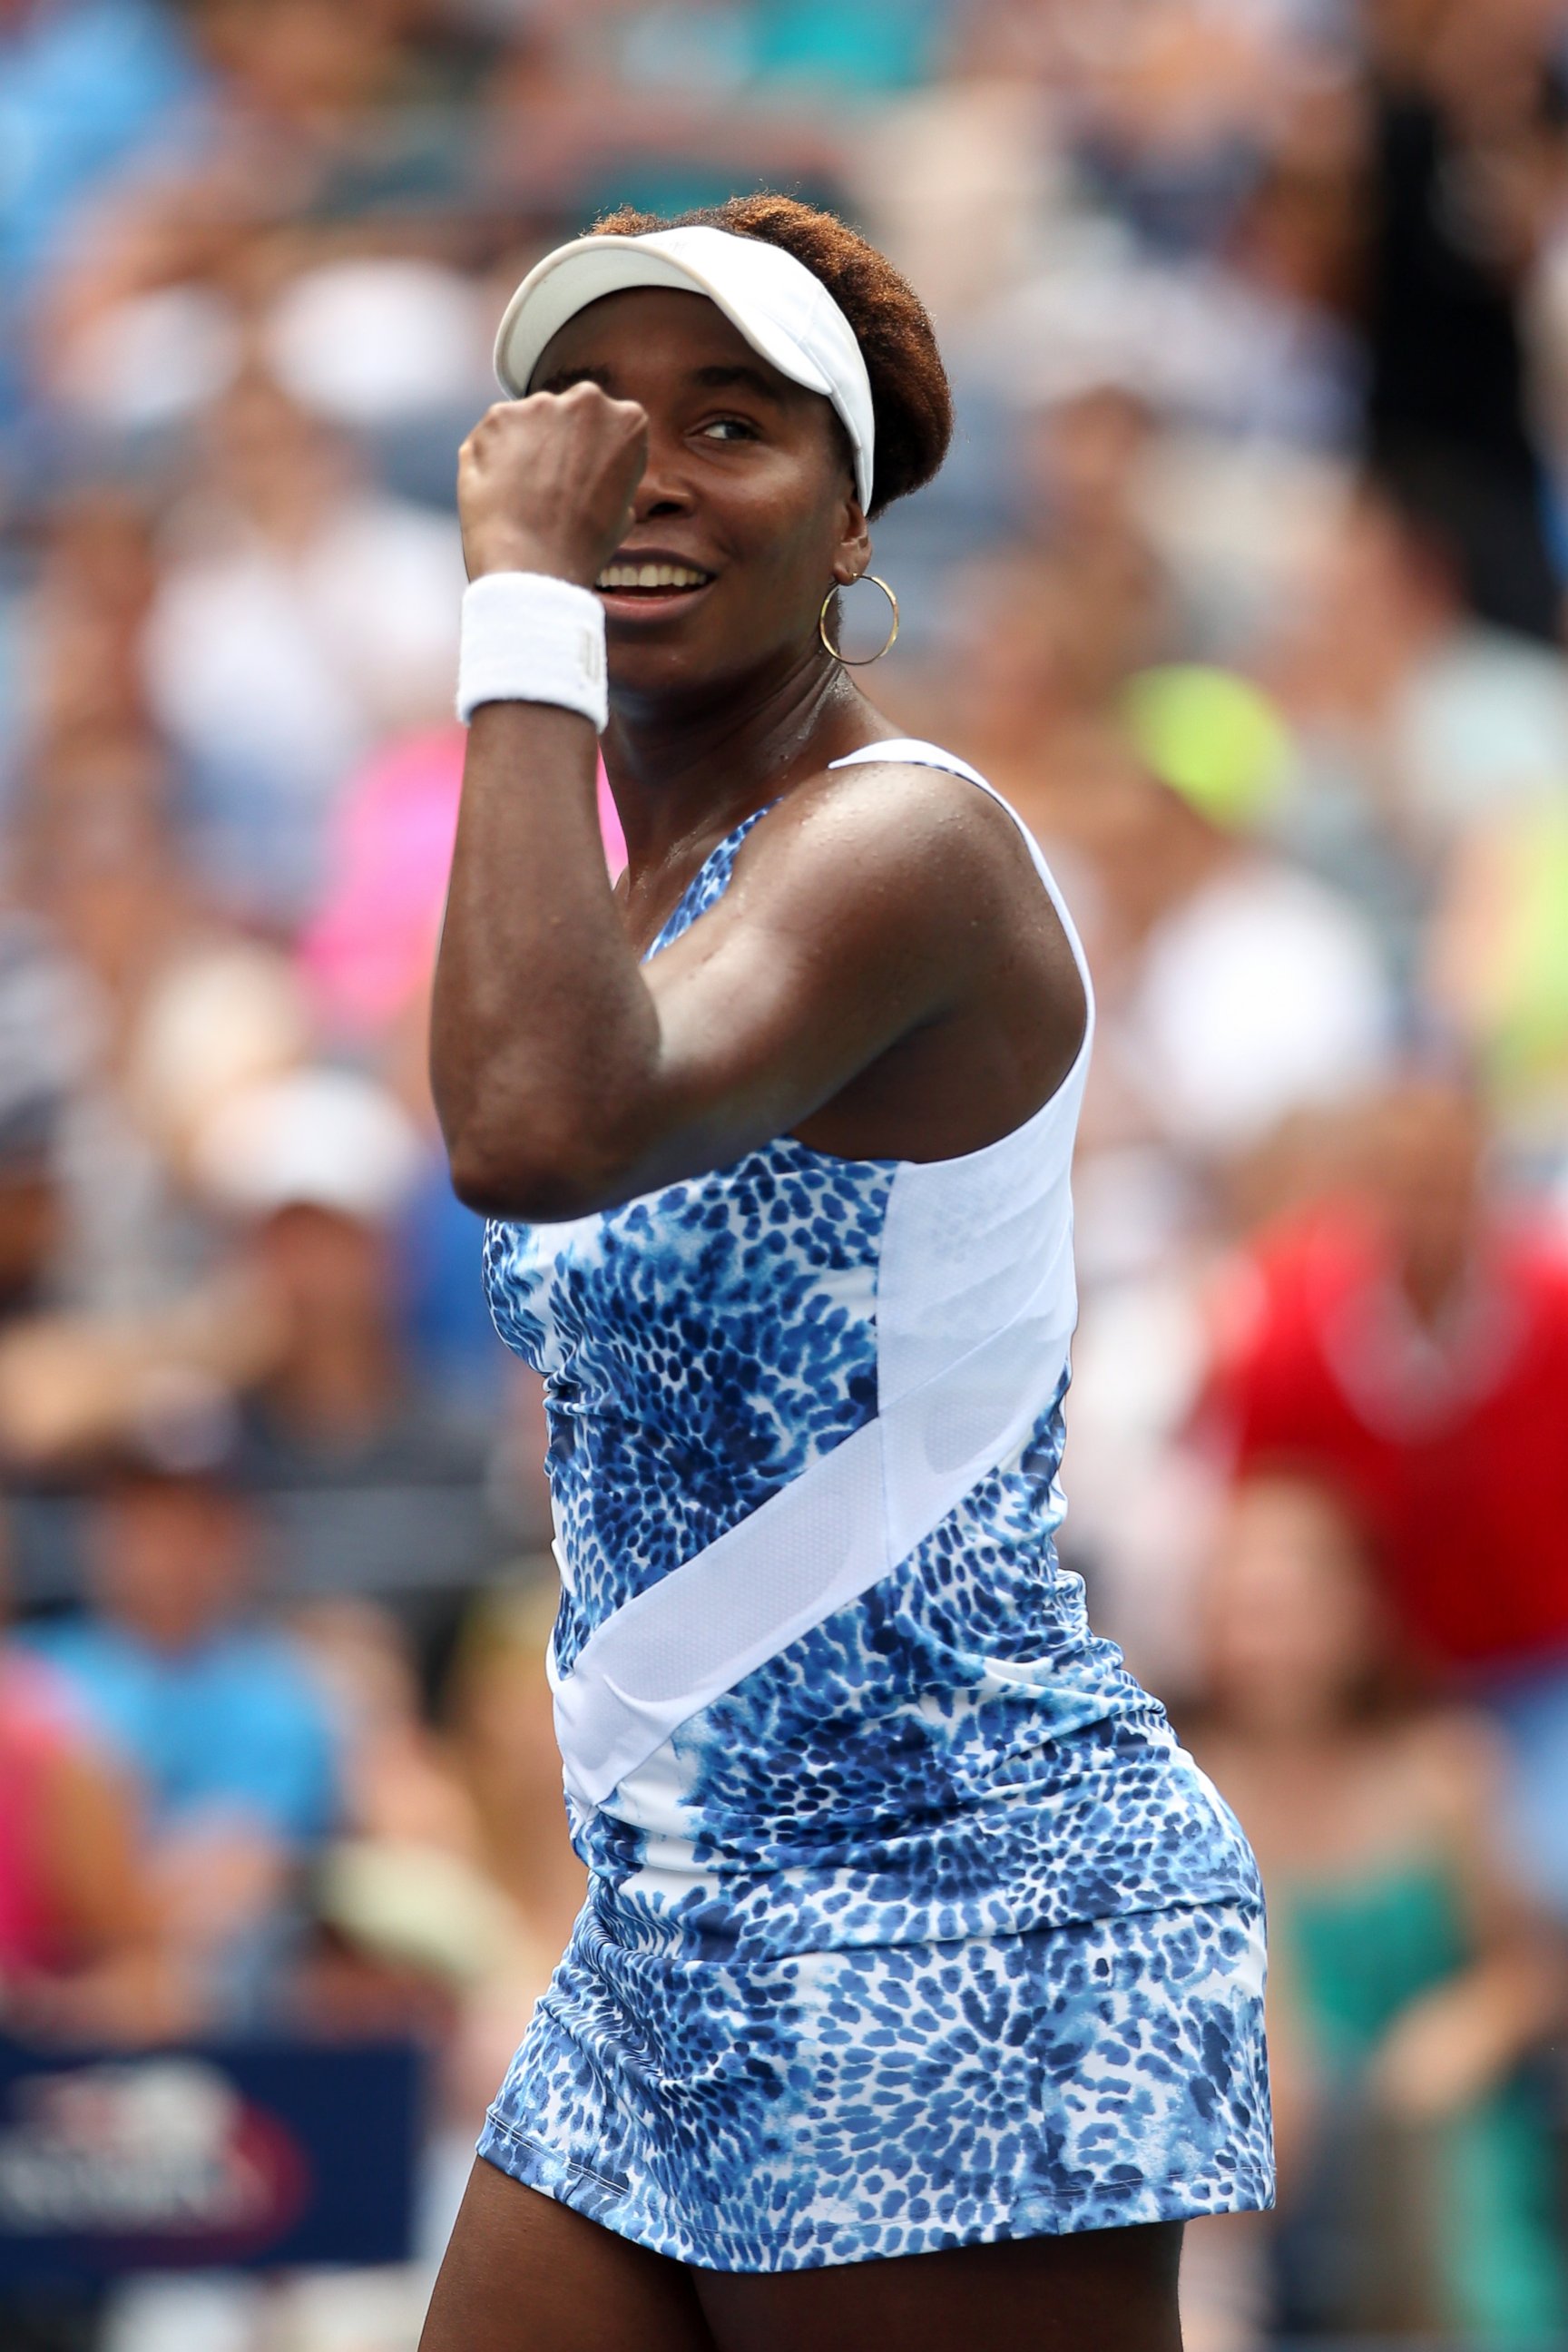 PHOTO: Venus Williams of the United States celebrates after defeating Belinda Bencic of Switzerland in their Women's Singles match at the 2015 US Open on Sept. 4, 2015 in New York.